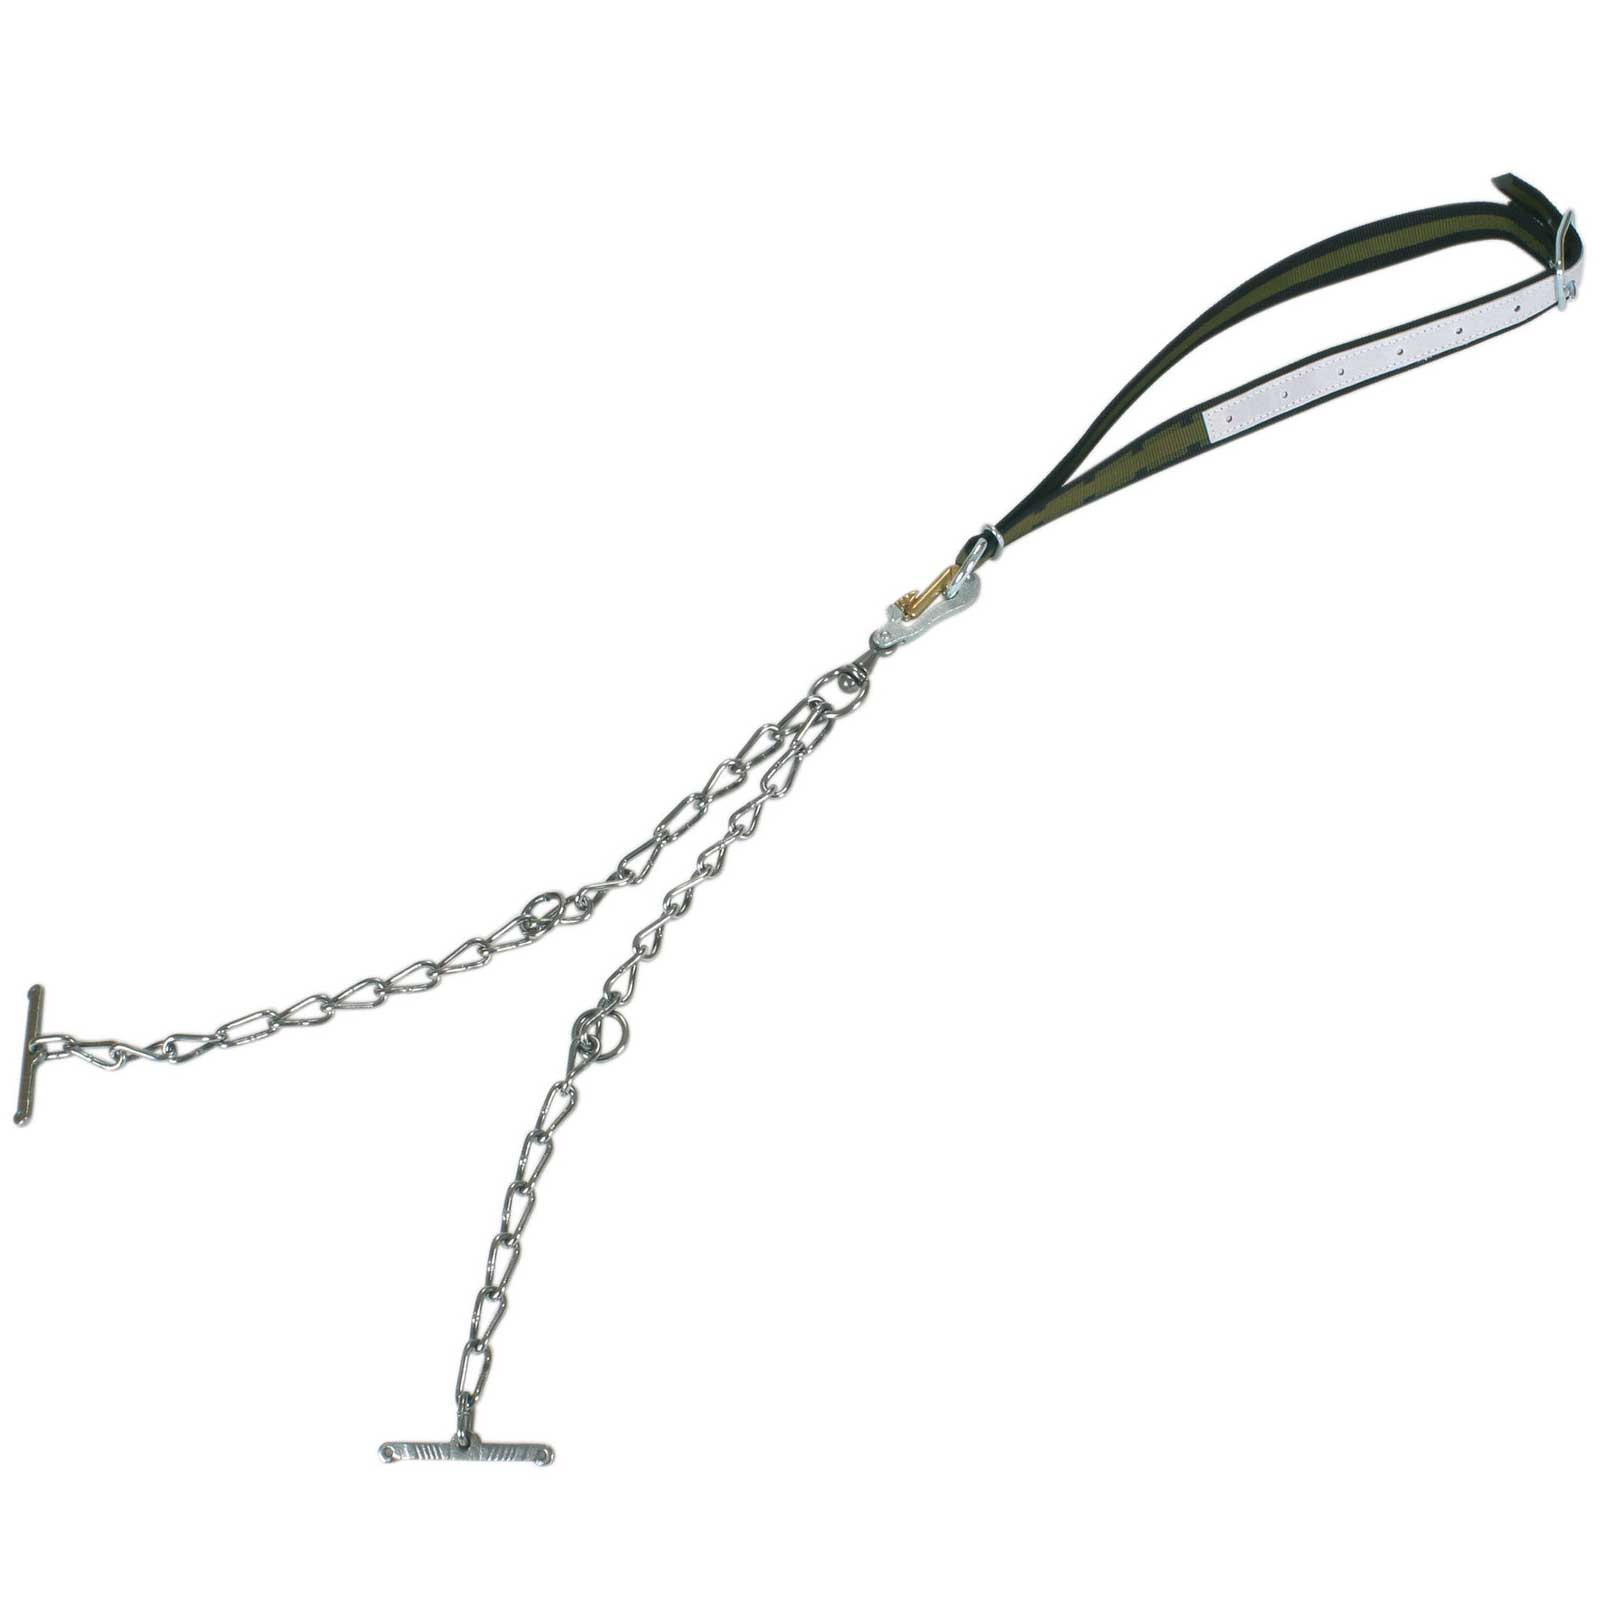 Cattle attachment compl. with chain 6 mm double with safety lock small